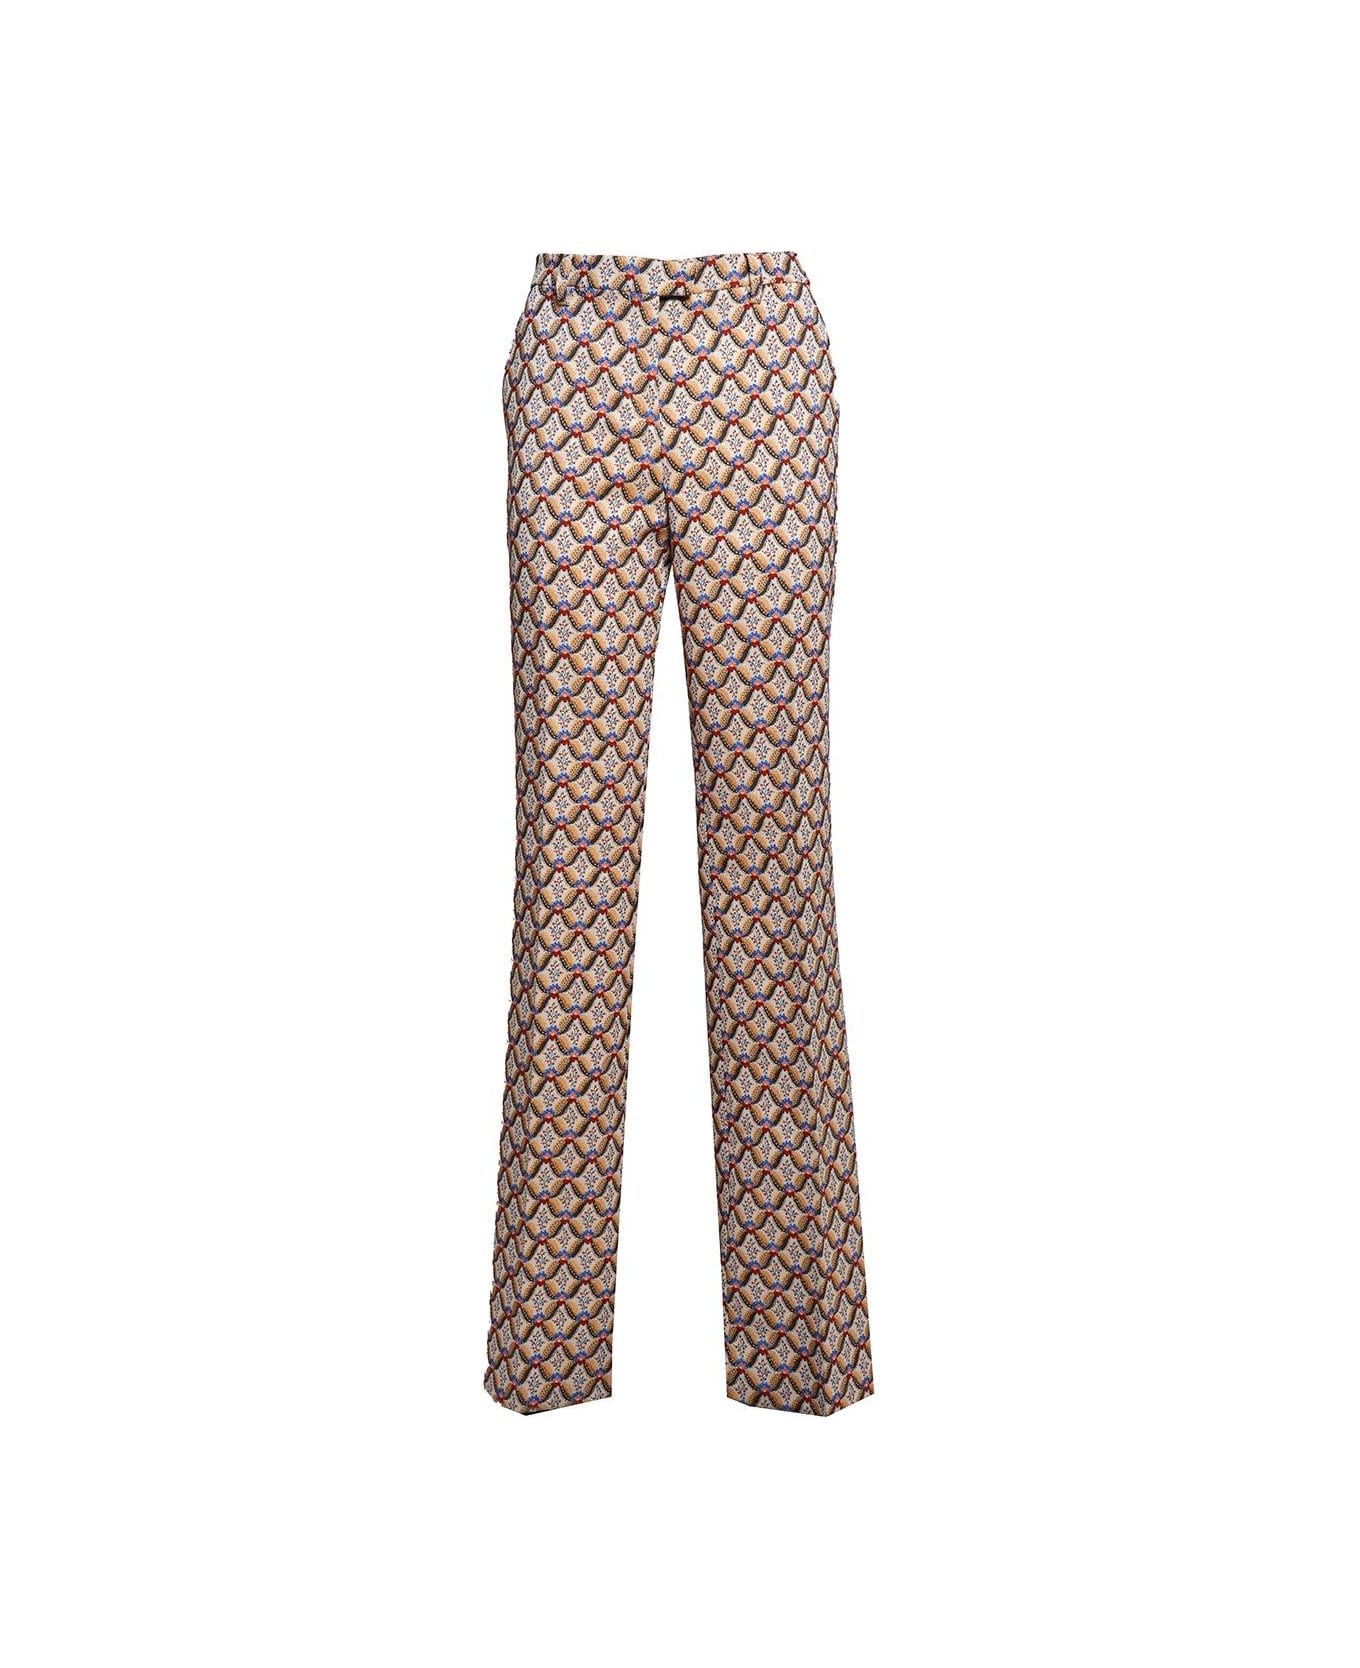 Etro Allover Floral Printed Straight-leg Trousers - Multicolour ボトムス